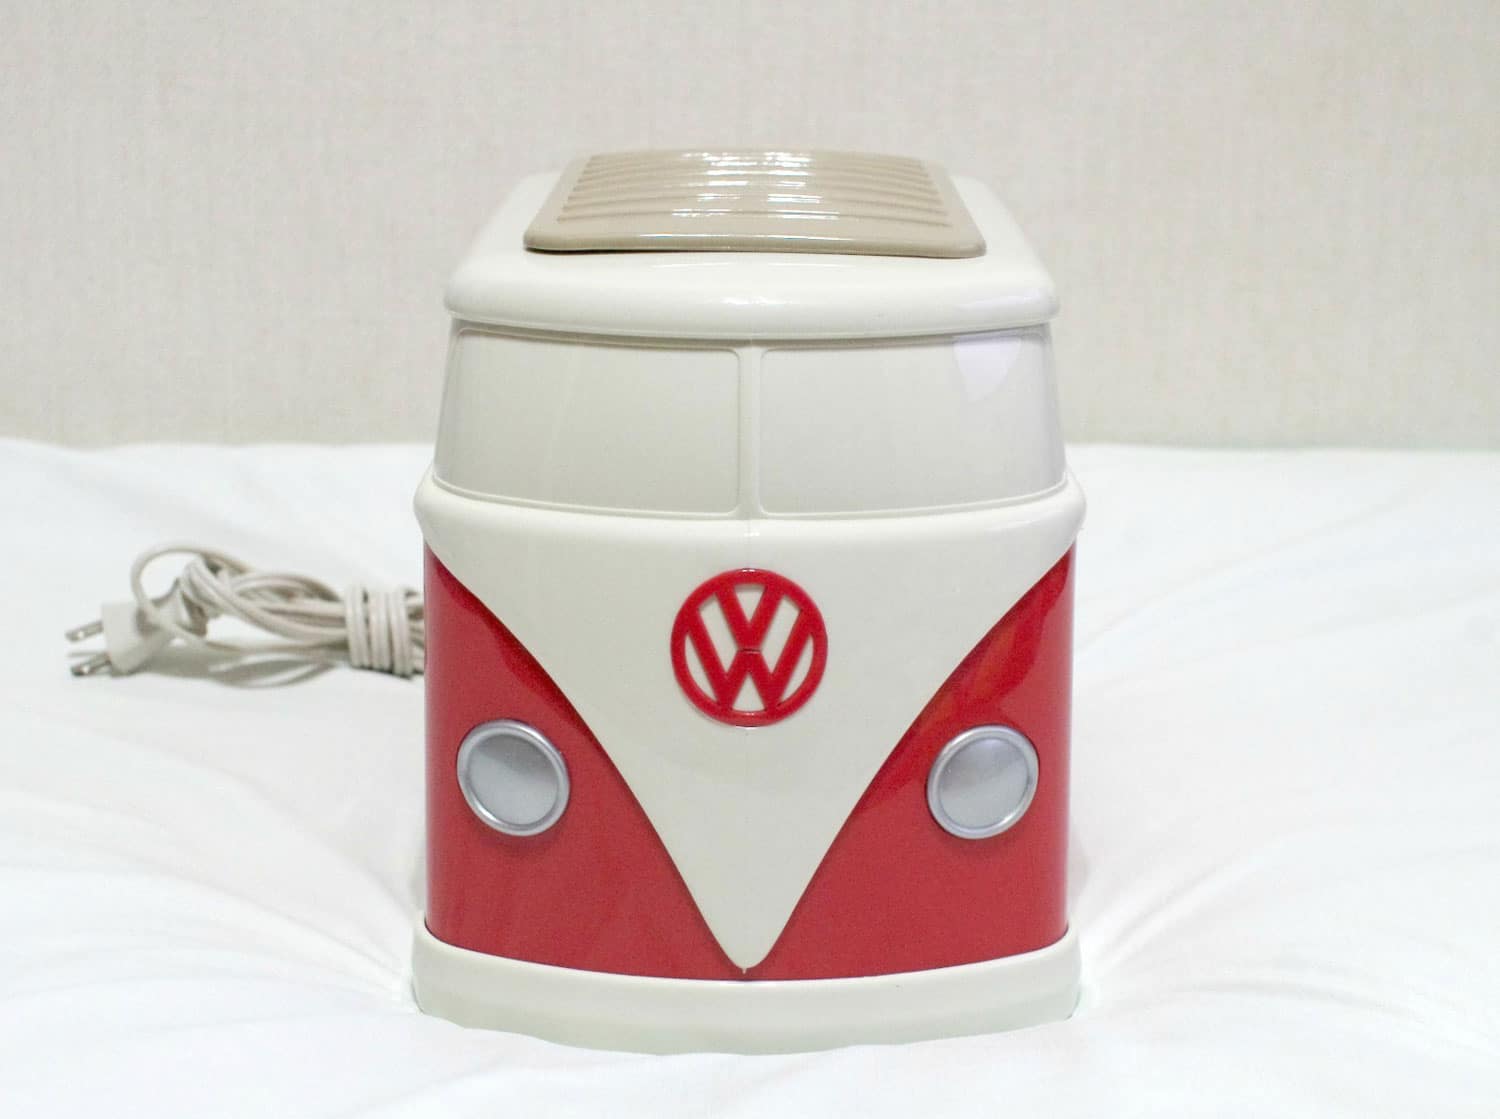 VW Bus Toaster And Toast For Your Hippie Inspired Breakfast | Bit Rebels